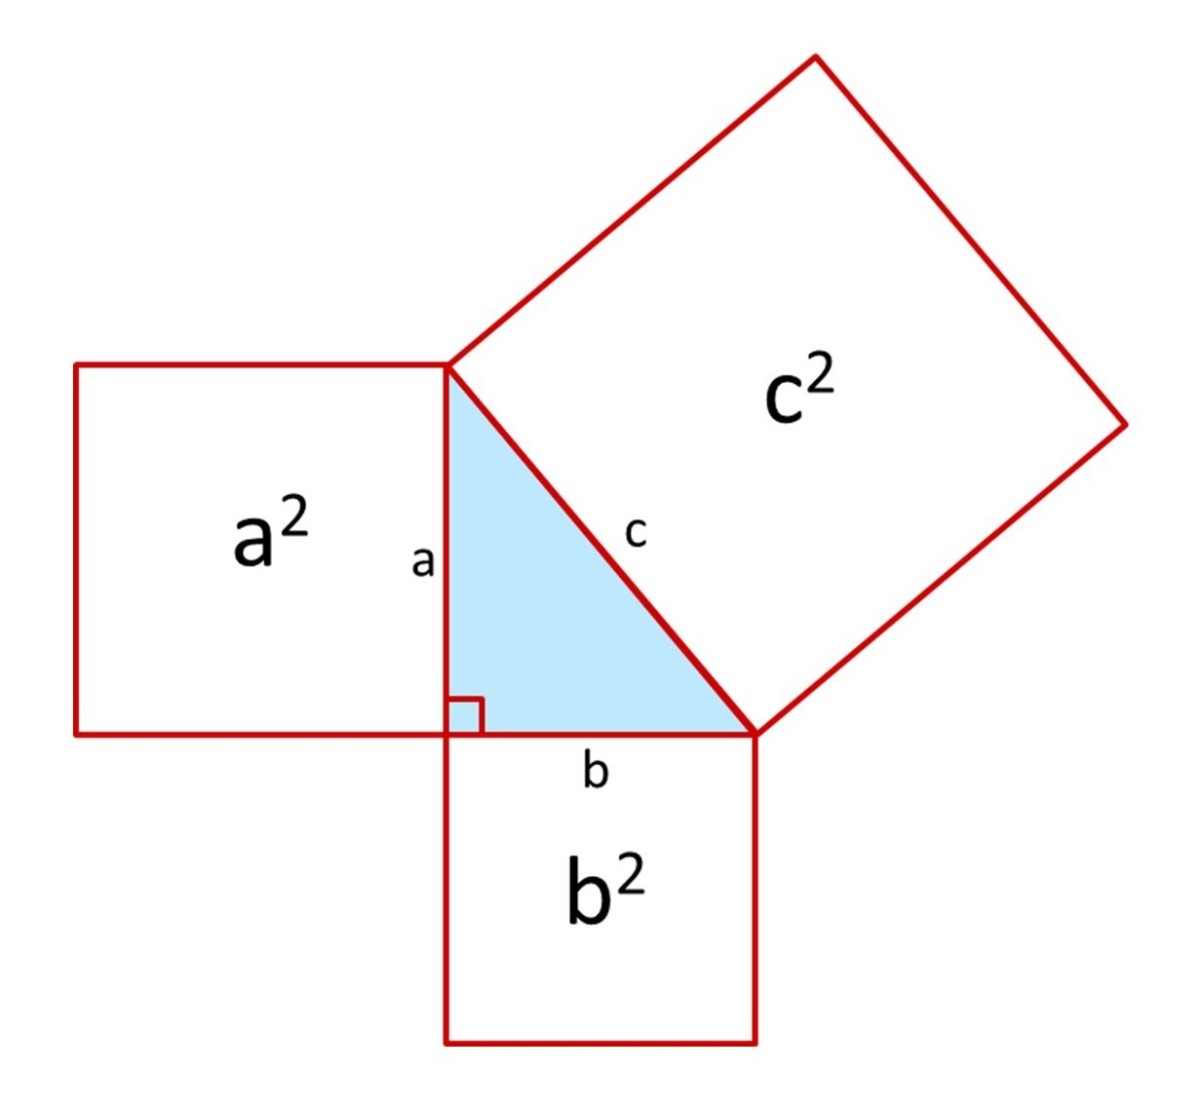 How to Use Pythagoras' Theorem to Find Missing Sides on Right-Angled Triangles